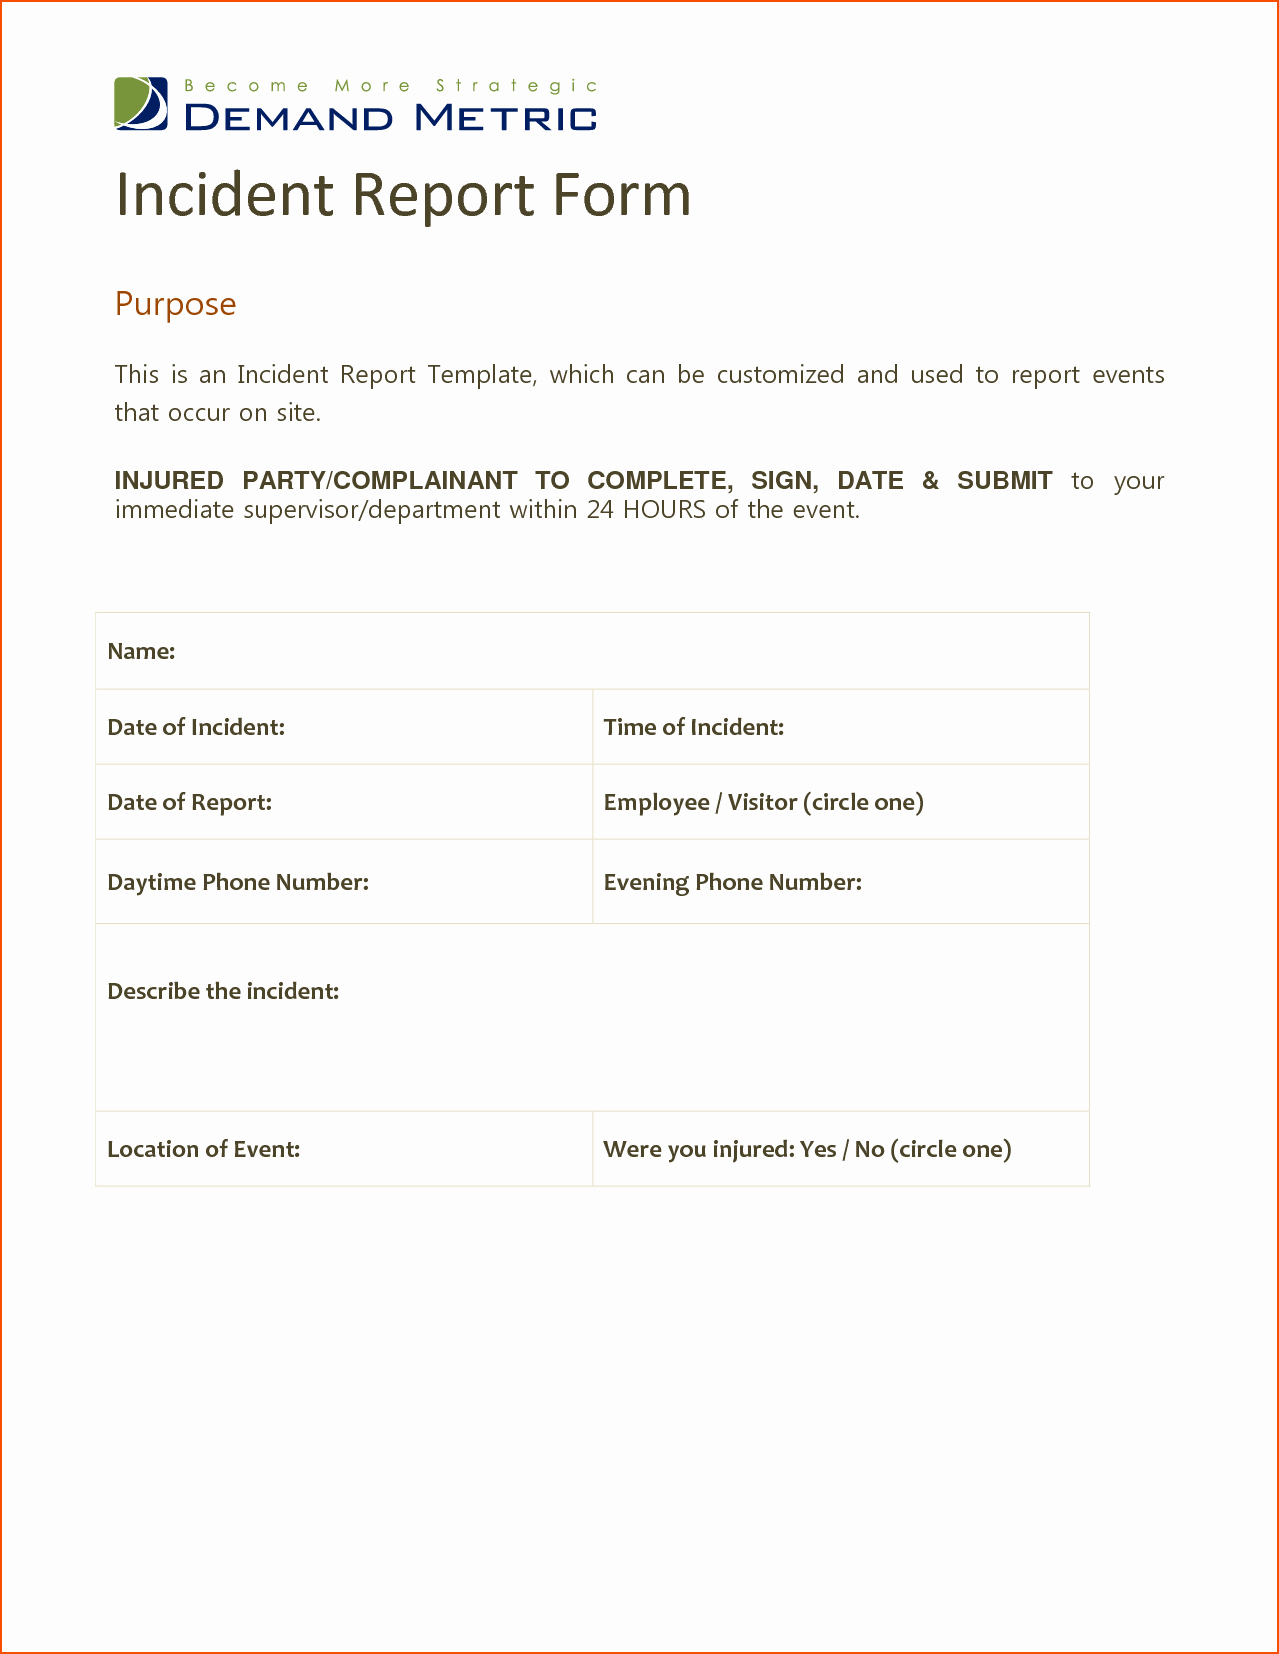 Incident Report Template Word Elegant Technical Writing Incident Report Sample Buy Research